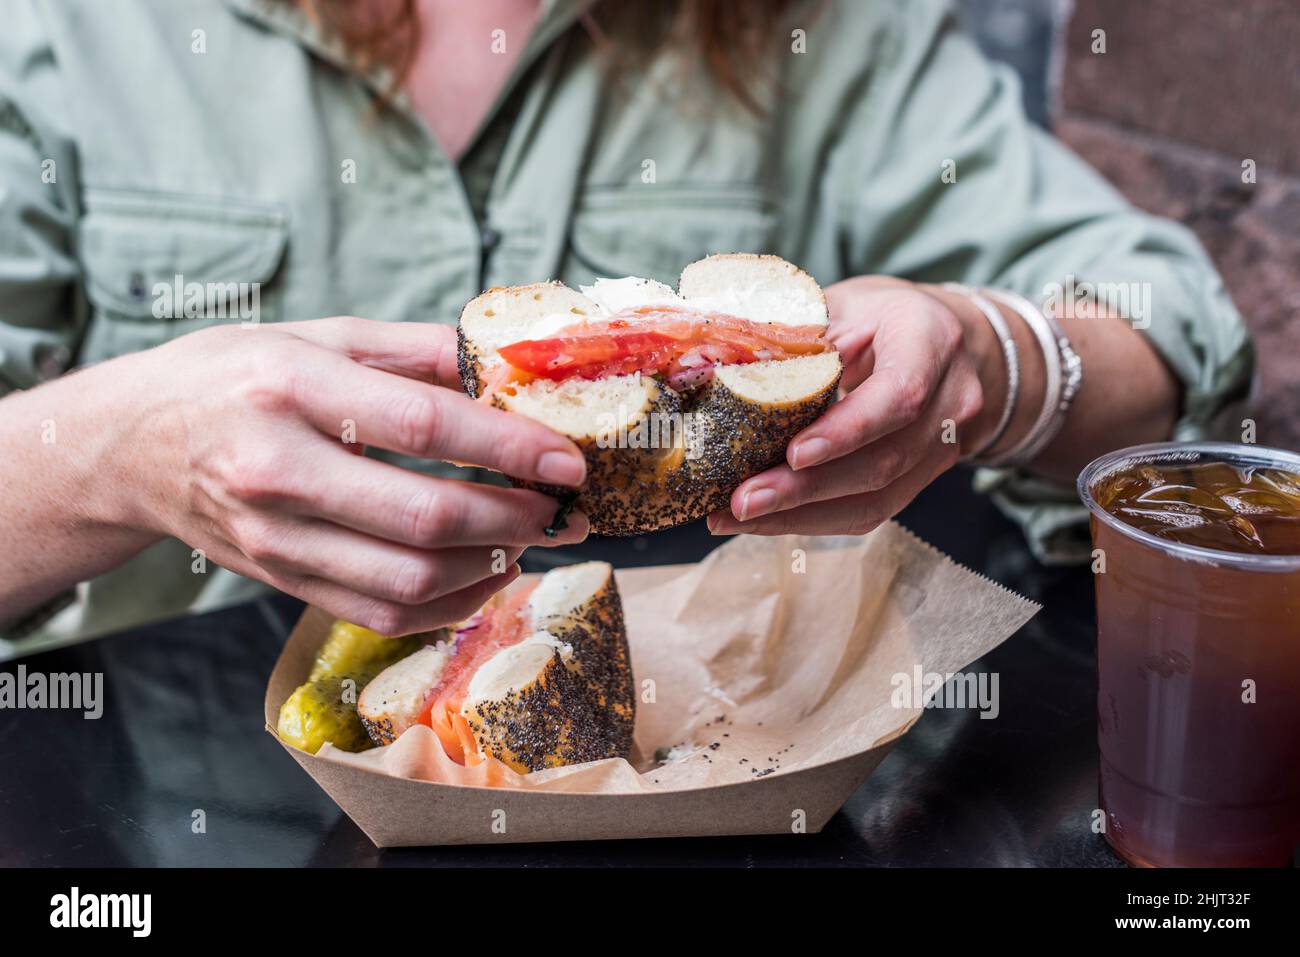 Women holding a poppyseed bagel with smoked fish, tomato and cream cheese. Stock Photo